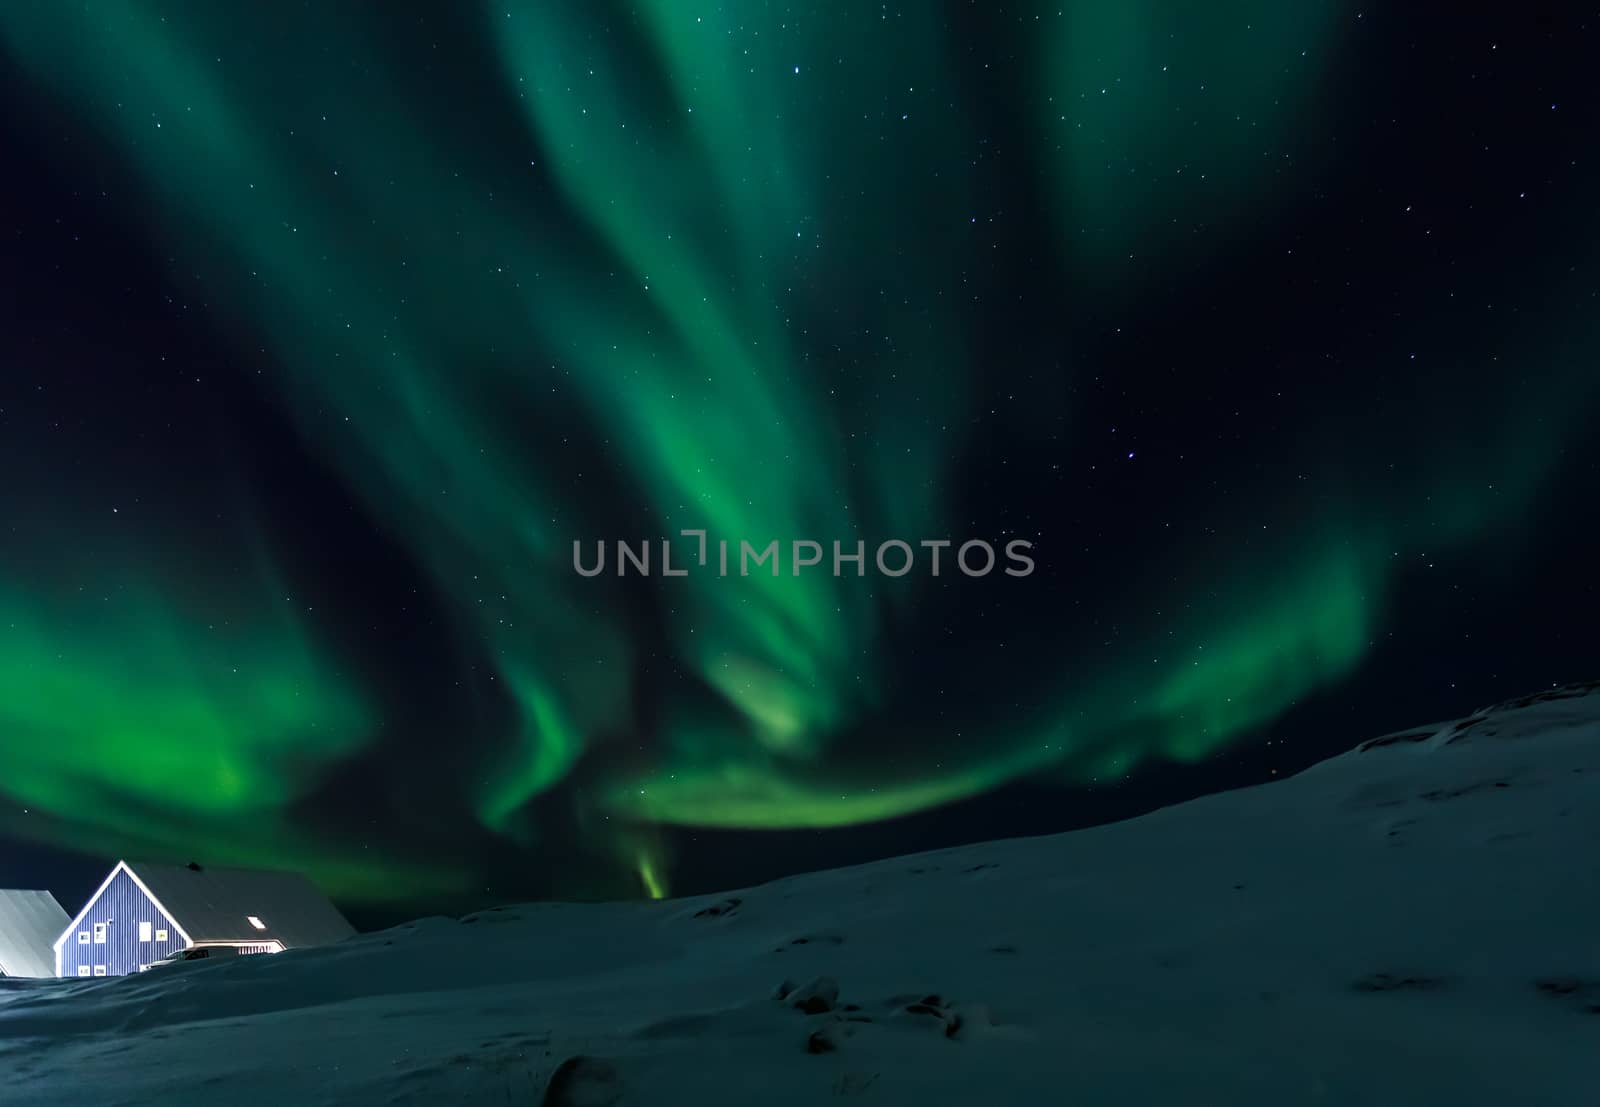 Arctic village and green waves of Northern lights over Inuit hou by ambeon